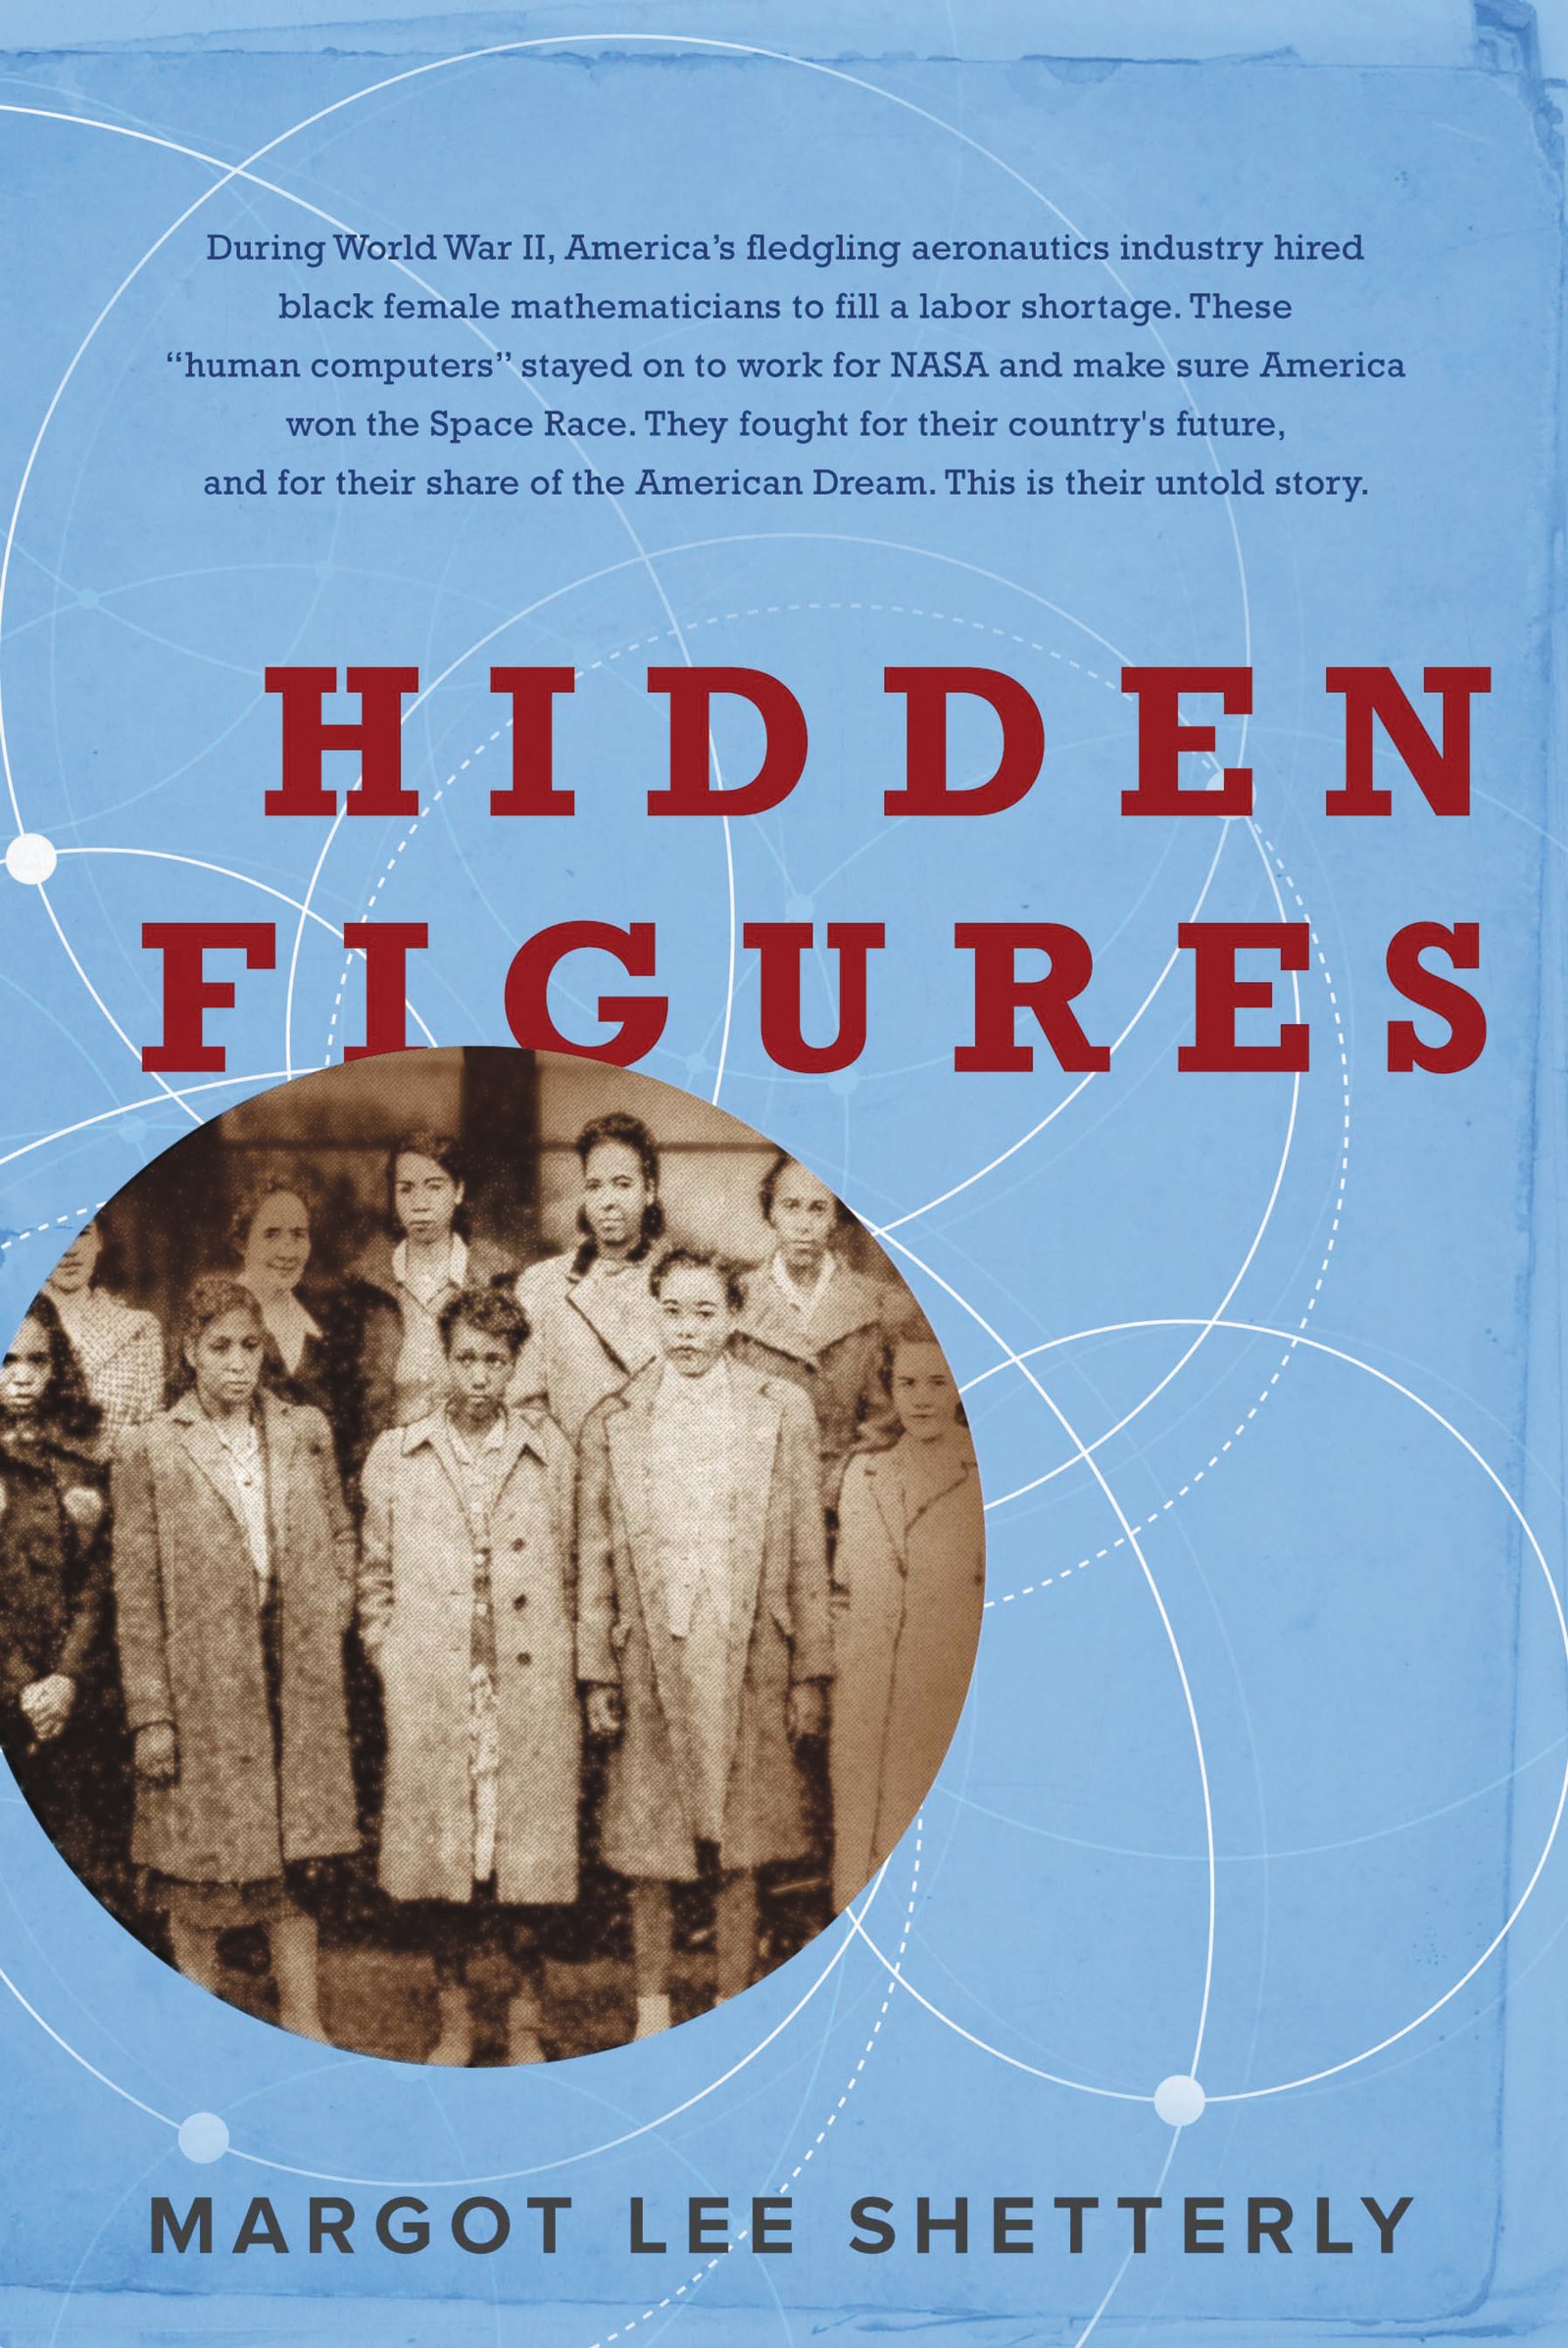 Cover image of the book 'Hidden Figures'